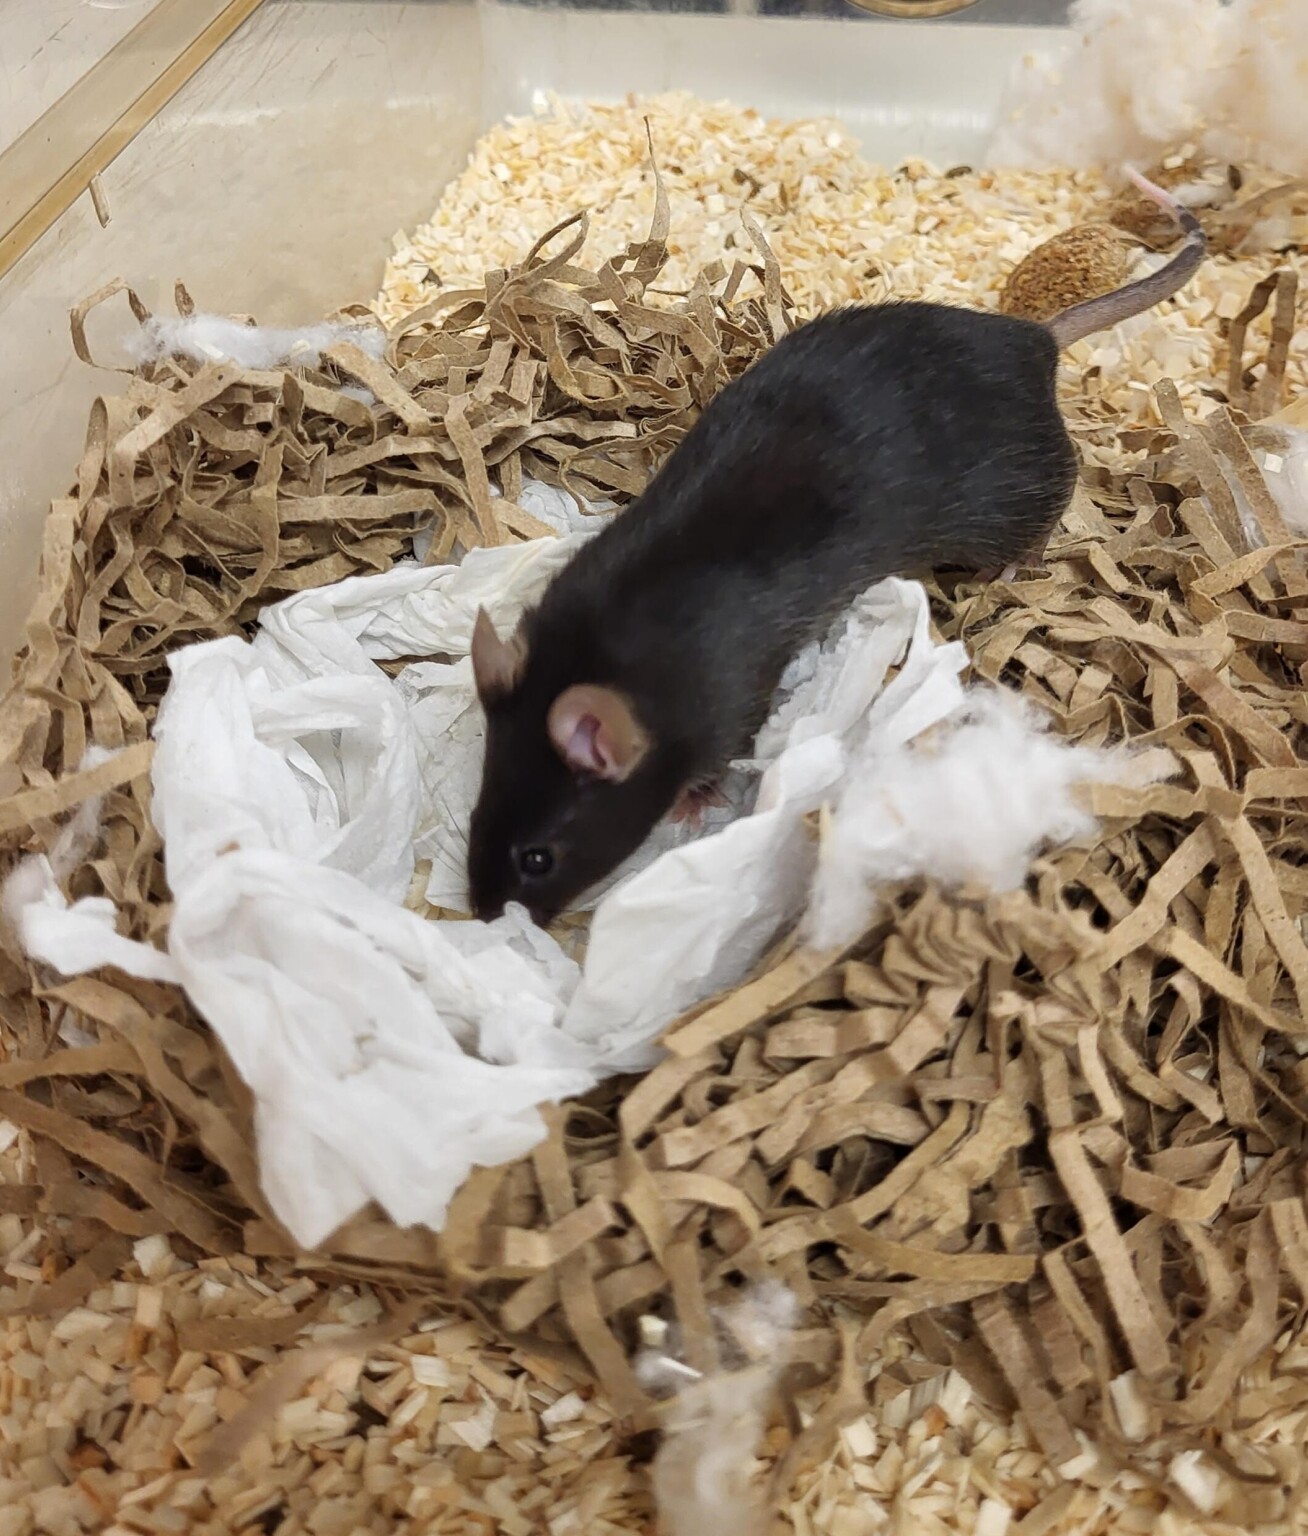 A mouse steps into a nest of bedding material